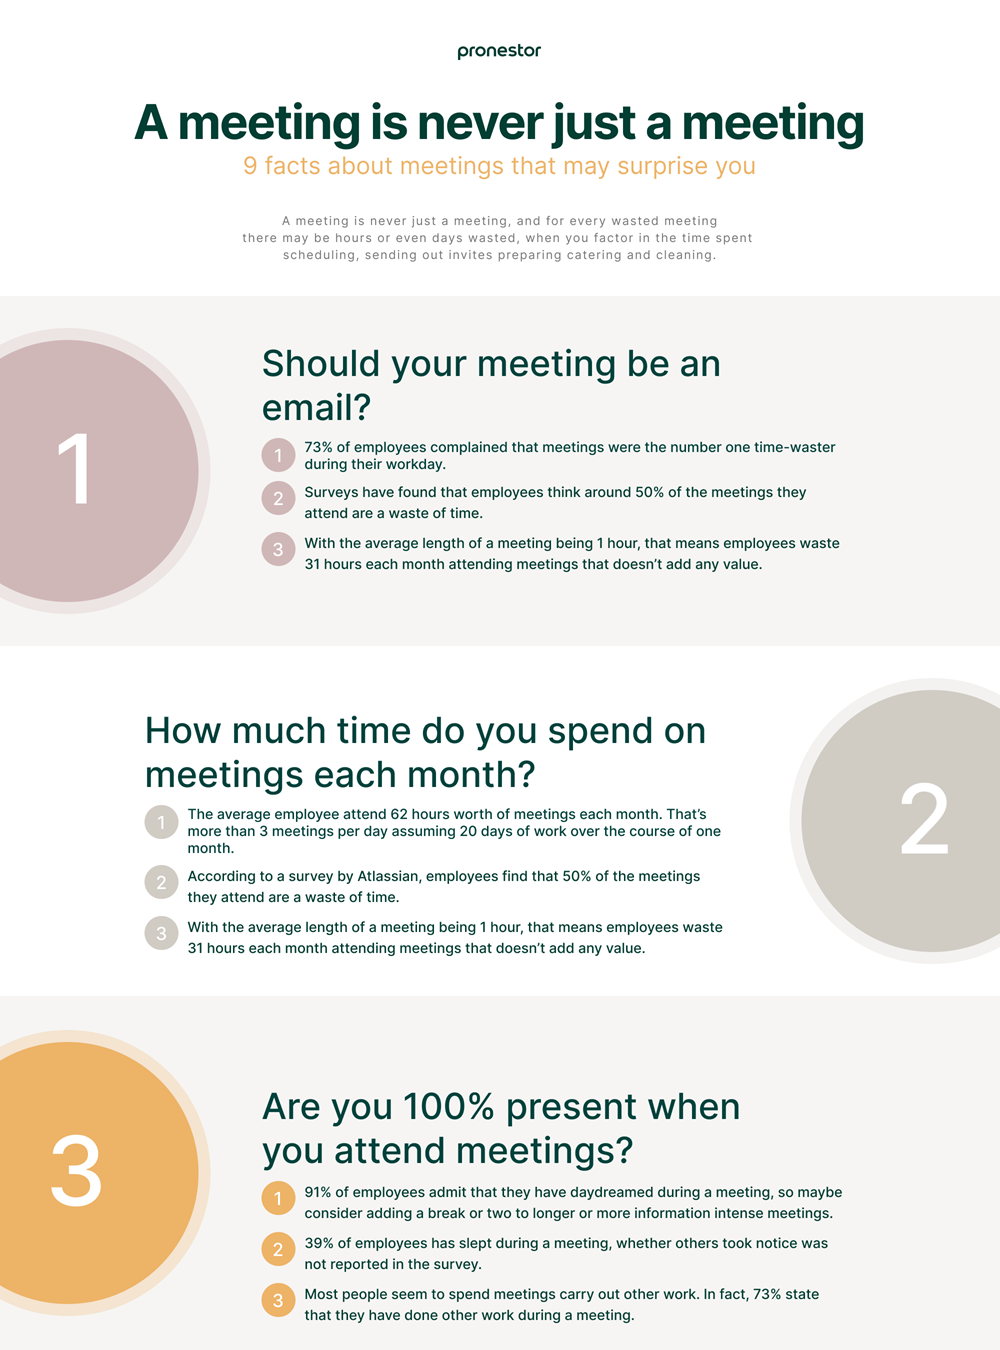 A meeting is never just a meeting inforgraph